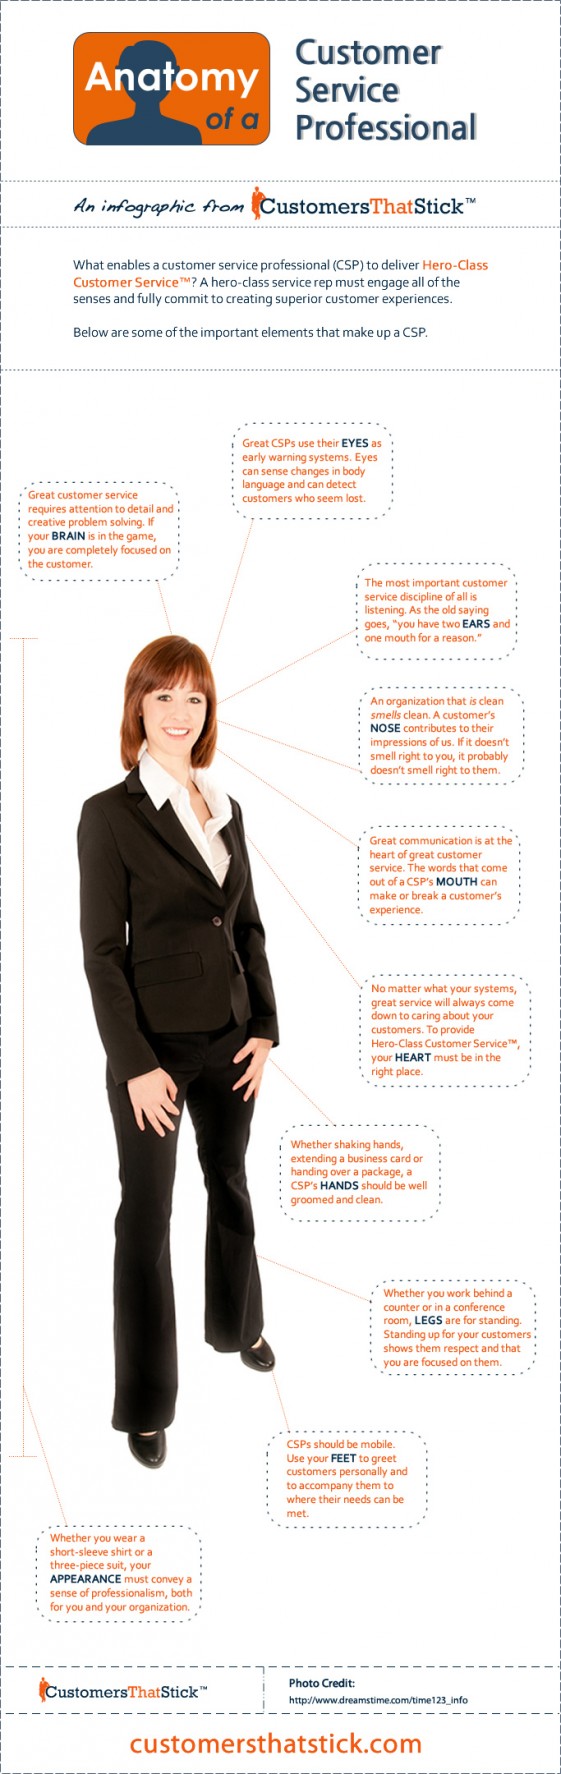 Anatomy of a Customer Service Professional (Infographic)